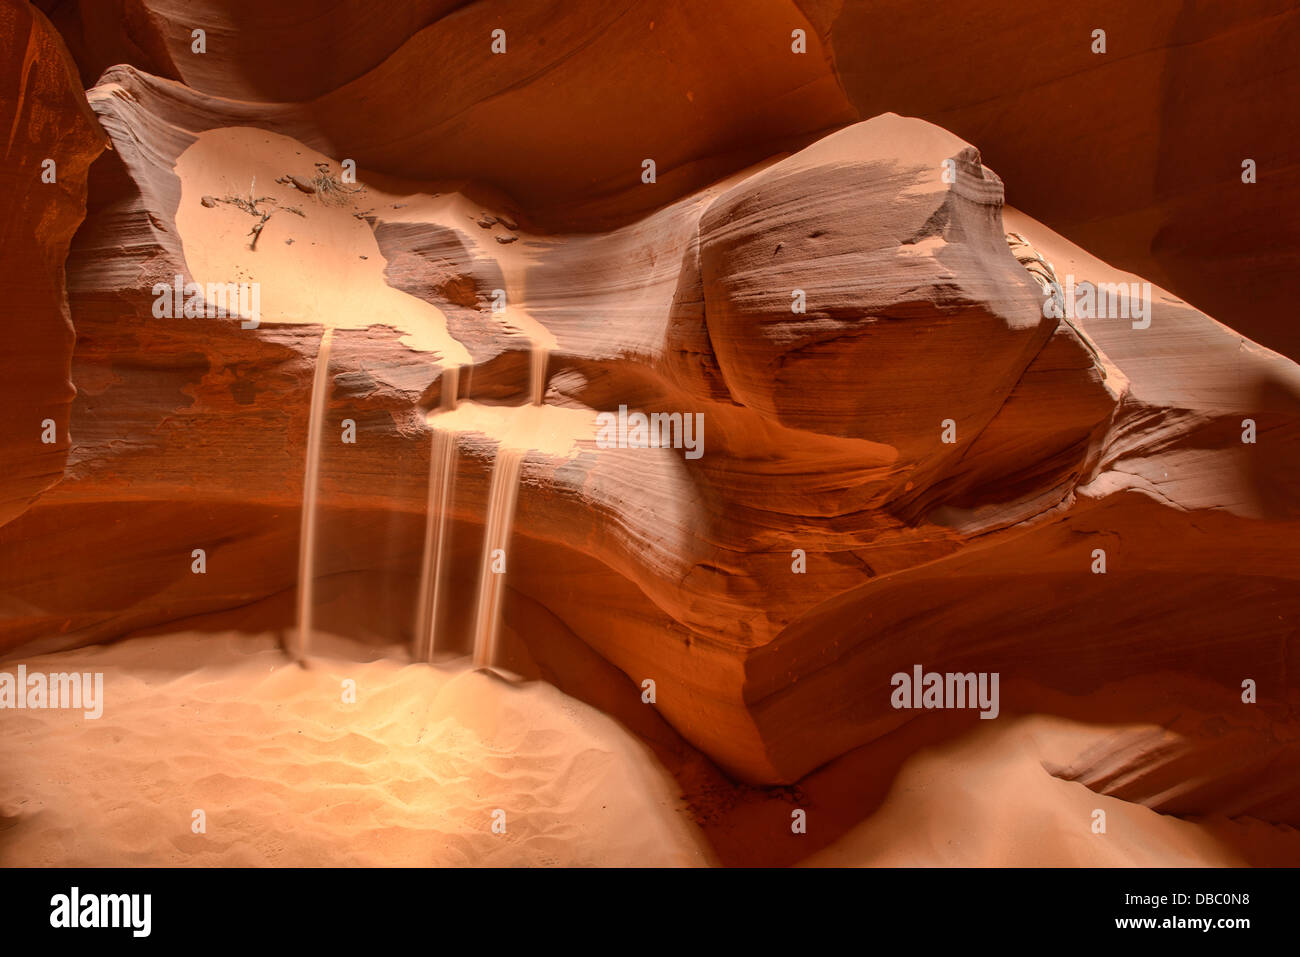 sand pouring in Upper Antelope Canyon, Page, Arizona. Stock Photo